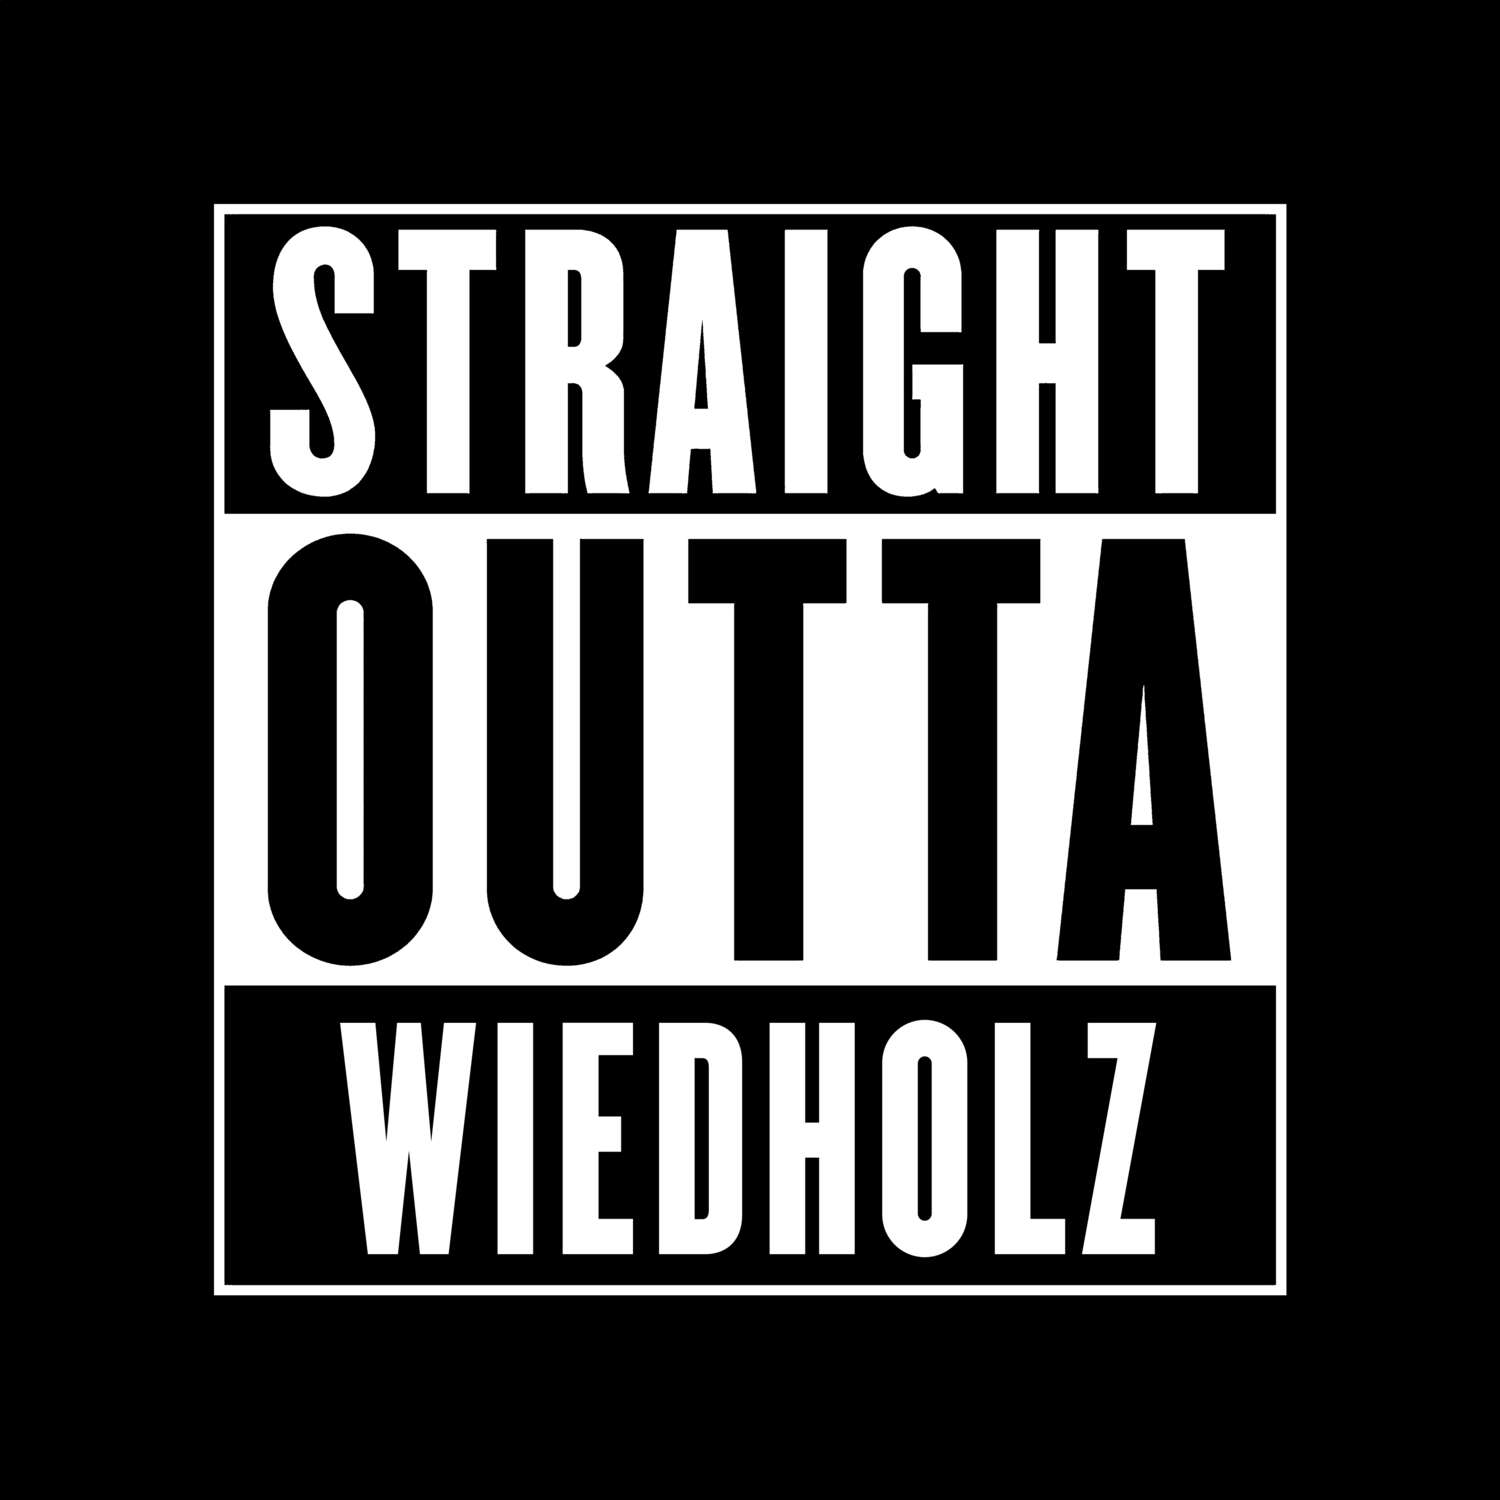 Wiedholz T-Shirt »Straight Outta«